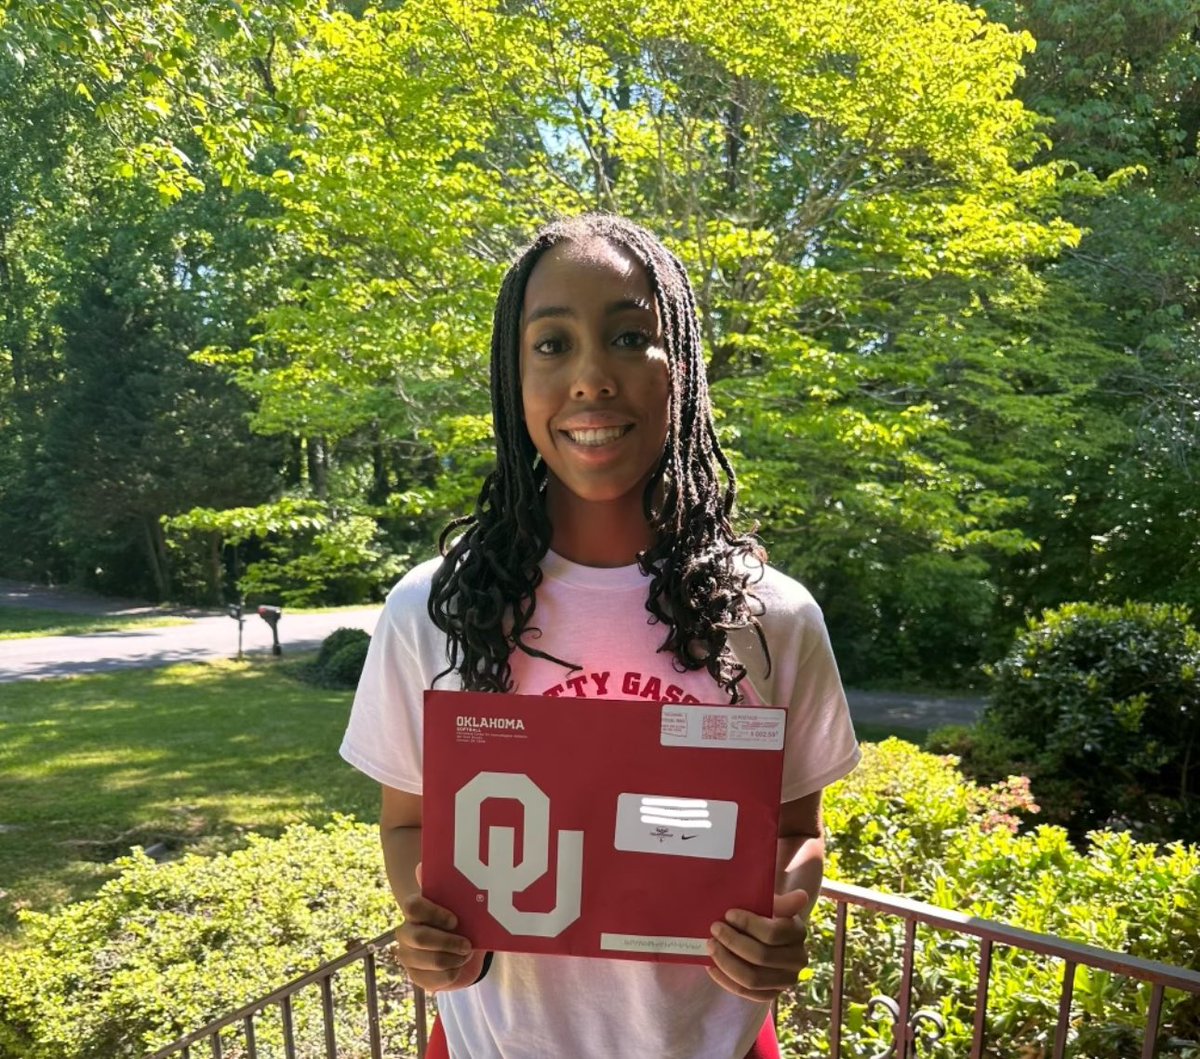 Received some unexpected news this week, but was excited to receive more mail from @OU_Softball Thank you @GassoPatty @coachjro @jtgasso @ExtraInningSB @hotshots_09 @MaxPreps @LegacyLegendsS1 @fastpitchwatch @LineDsoftball @SoftballDown @CoastRecruits @SBRRetweets